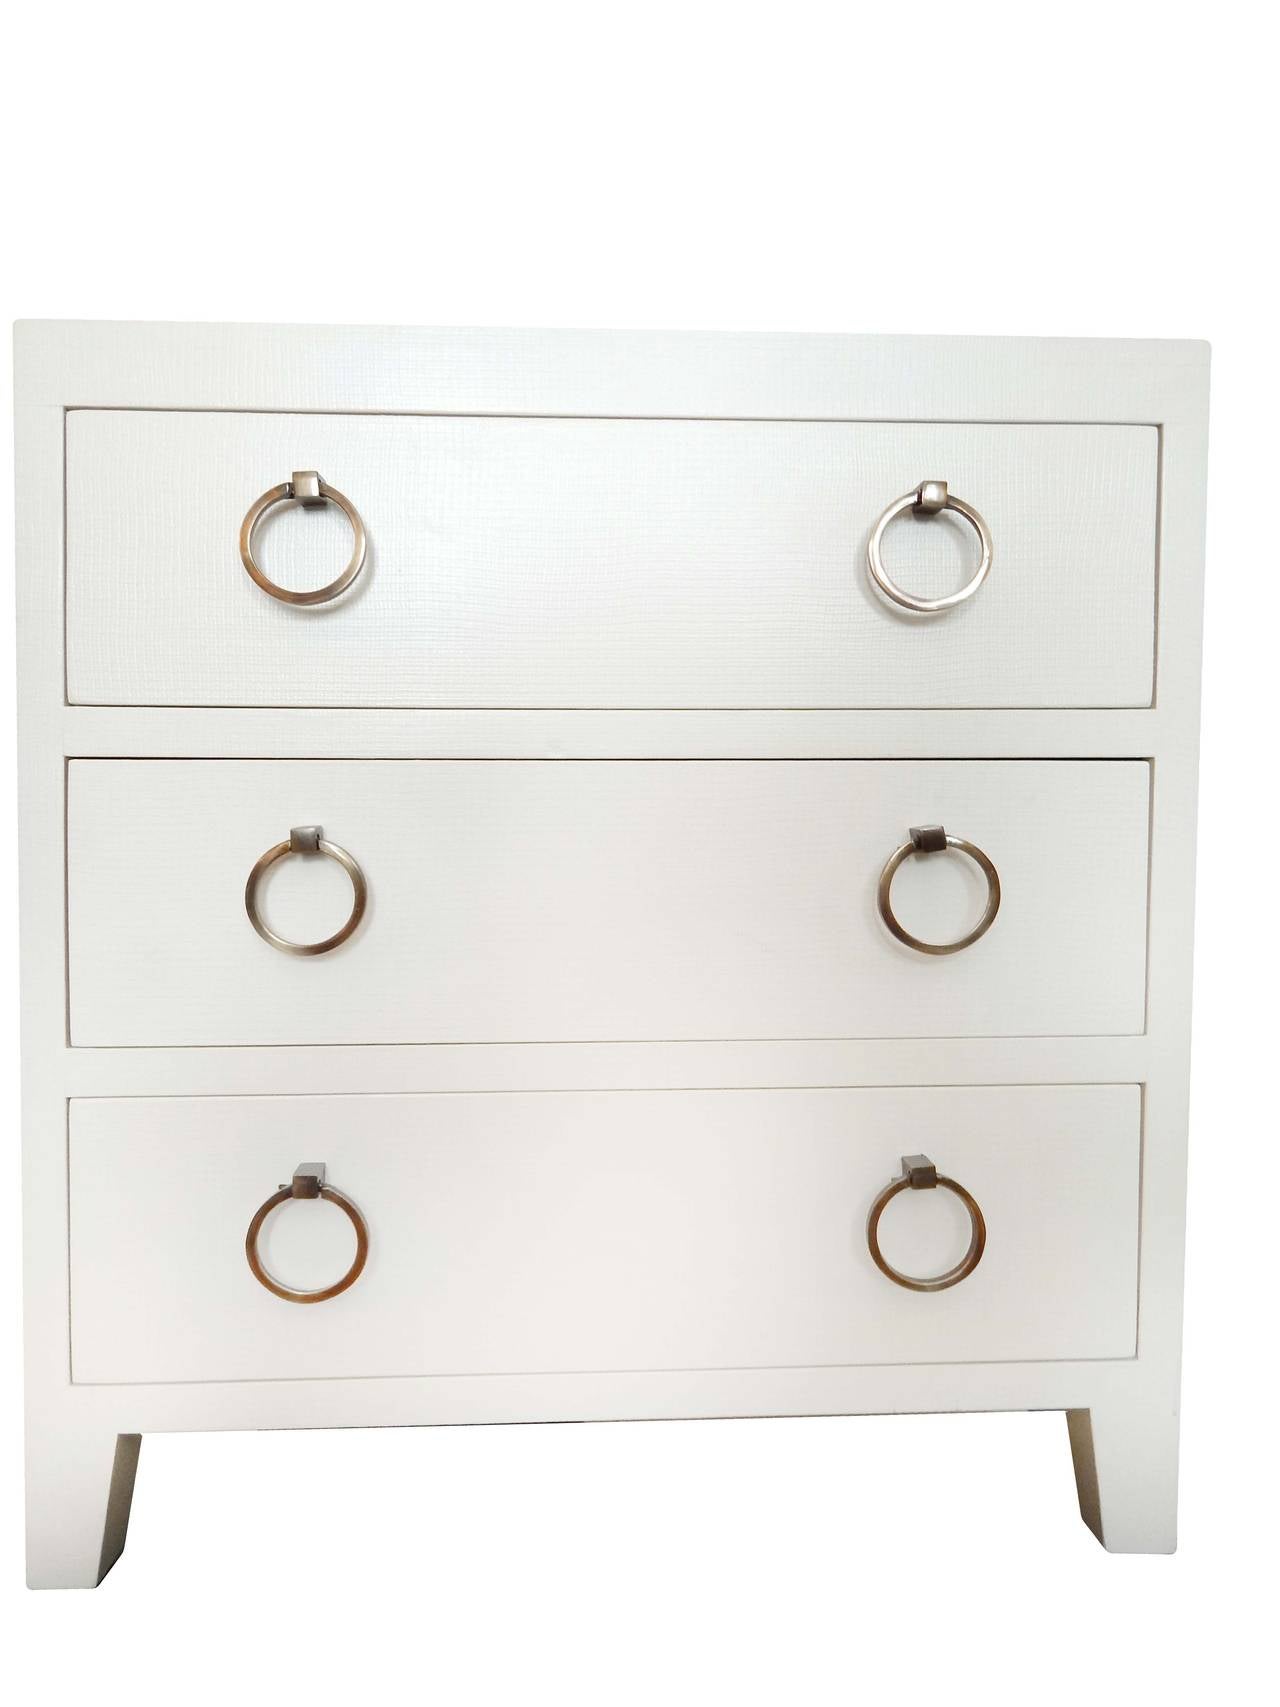 Pair of Textured Hand-Painted Dressers In Good Condition For Sale In Bridgehampton, NY